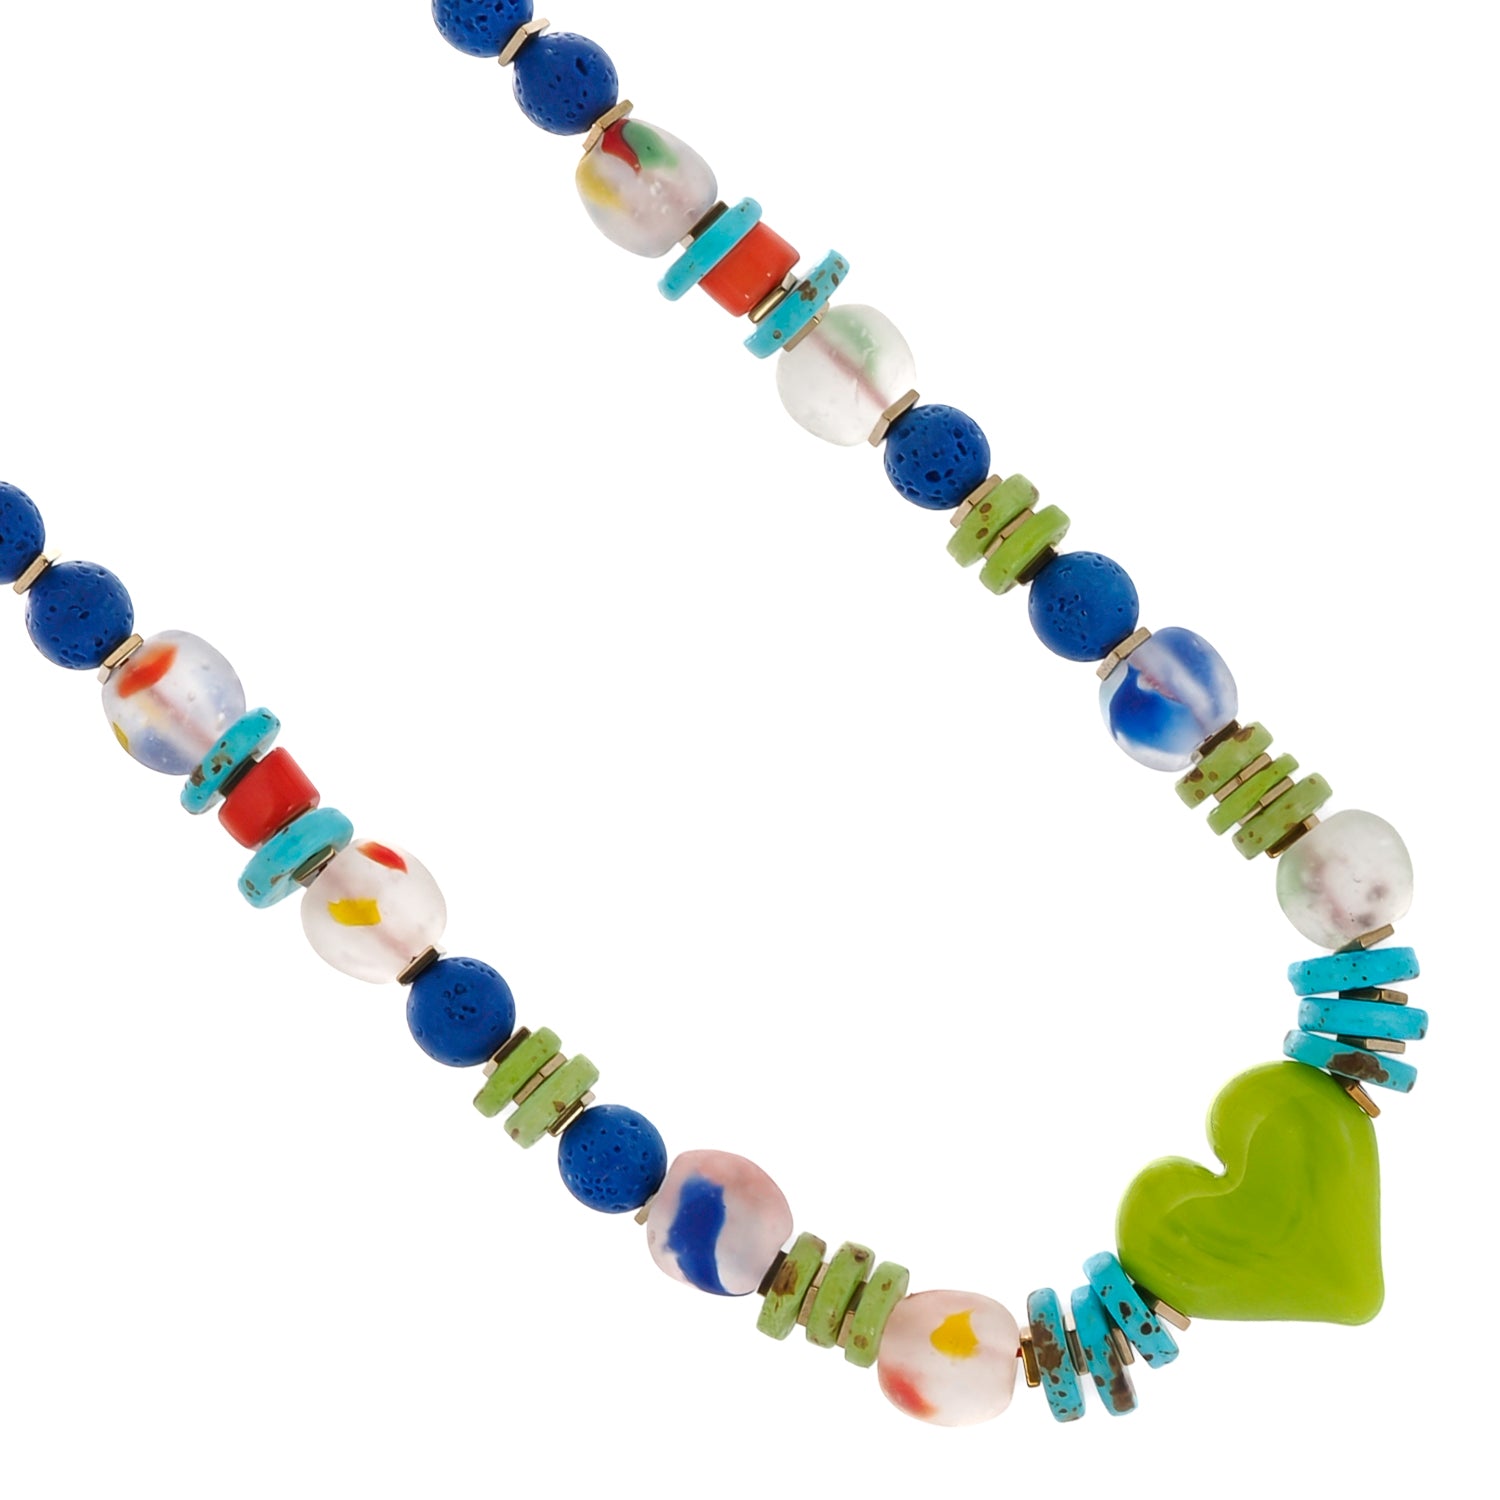 Green Ceramic Heart Colorful Life Bohemian Beaded Necklace